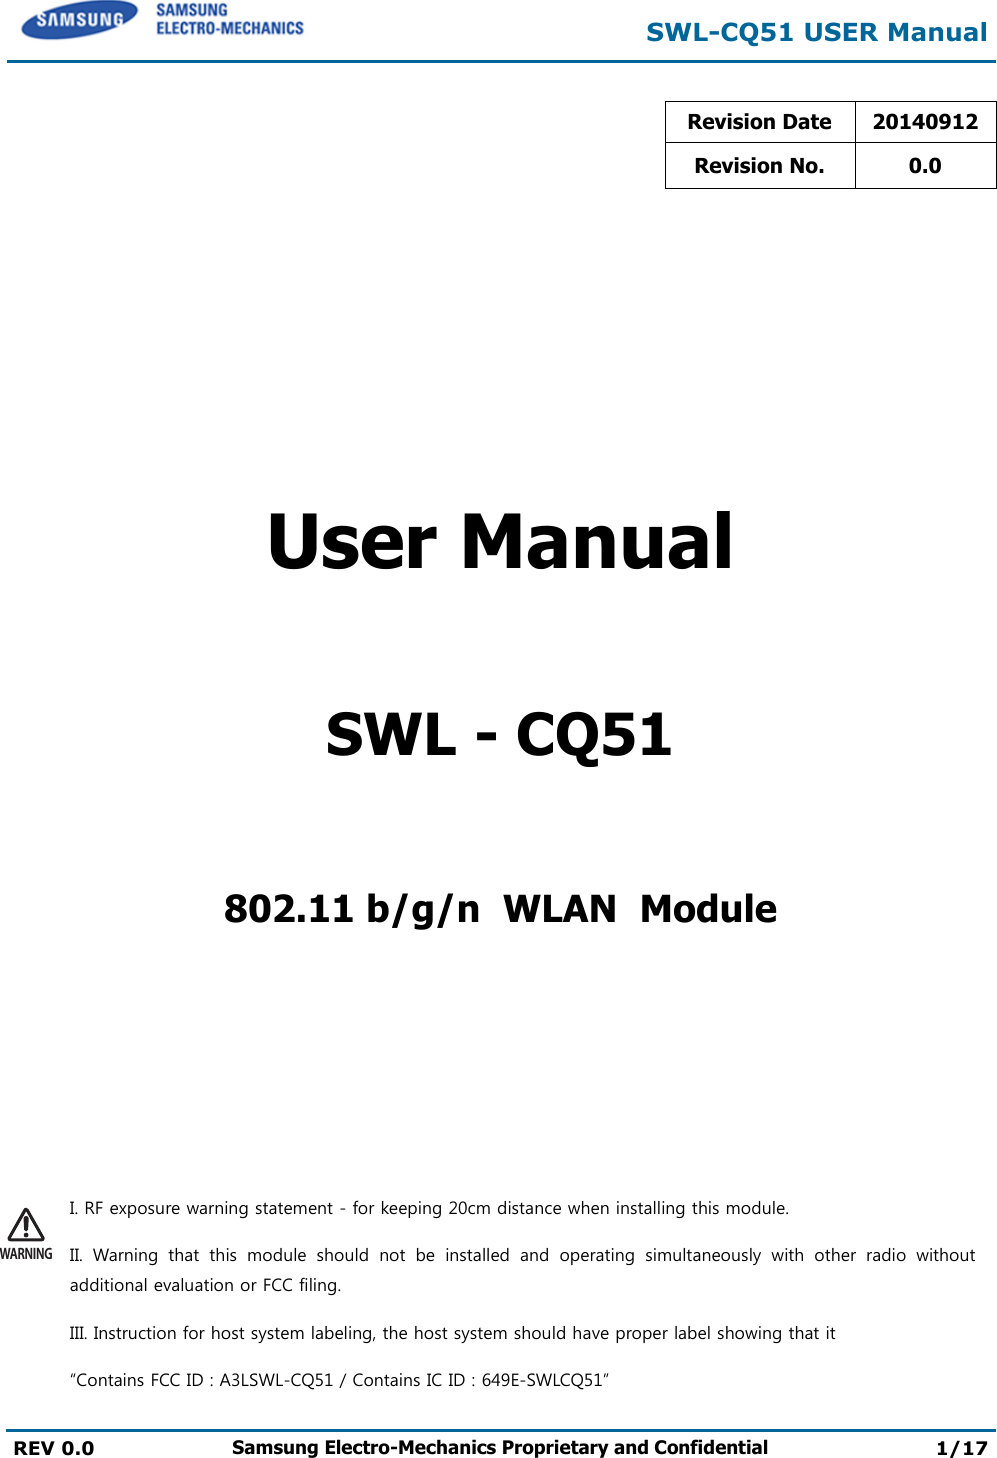  SWL-CQ51 USER Manual  REV 0.0 Samsung Electro-Mechanics Proprietary and Confidential 1/17  Revision Date 20140912 Revision No. 0.0       User Manual  SWL - CQ51  802.11 b/g/n  WLAN  Module    WARNINGI. RF exposure warning statement - for keeping 20cm distance when installing this module. II. Warning that this module should not be installed and operating simultaneously with other radio without additional evaluation or FCC filing. III. Instruction for host system labeling, the host system should have proper label showing that it “Contains FCC ID : A3LSWL-CQ51 / Contains IC ID : 649E-SWLCQ51” 